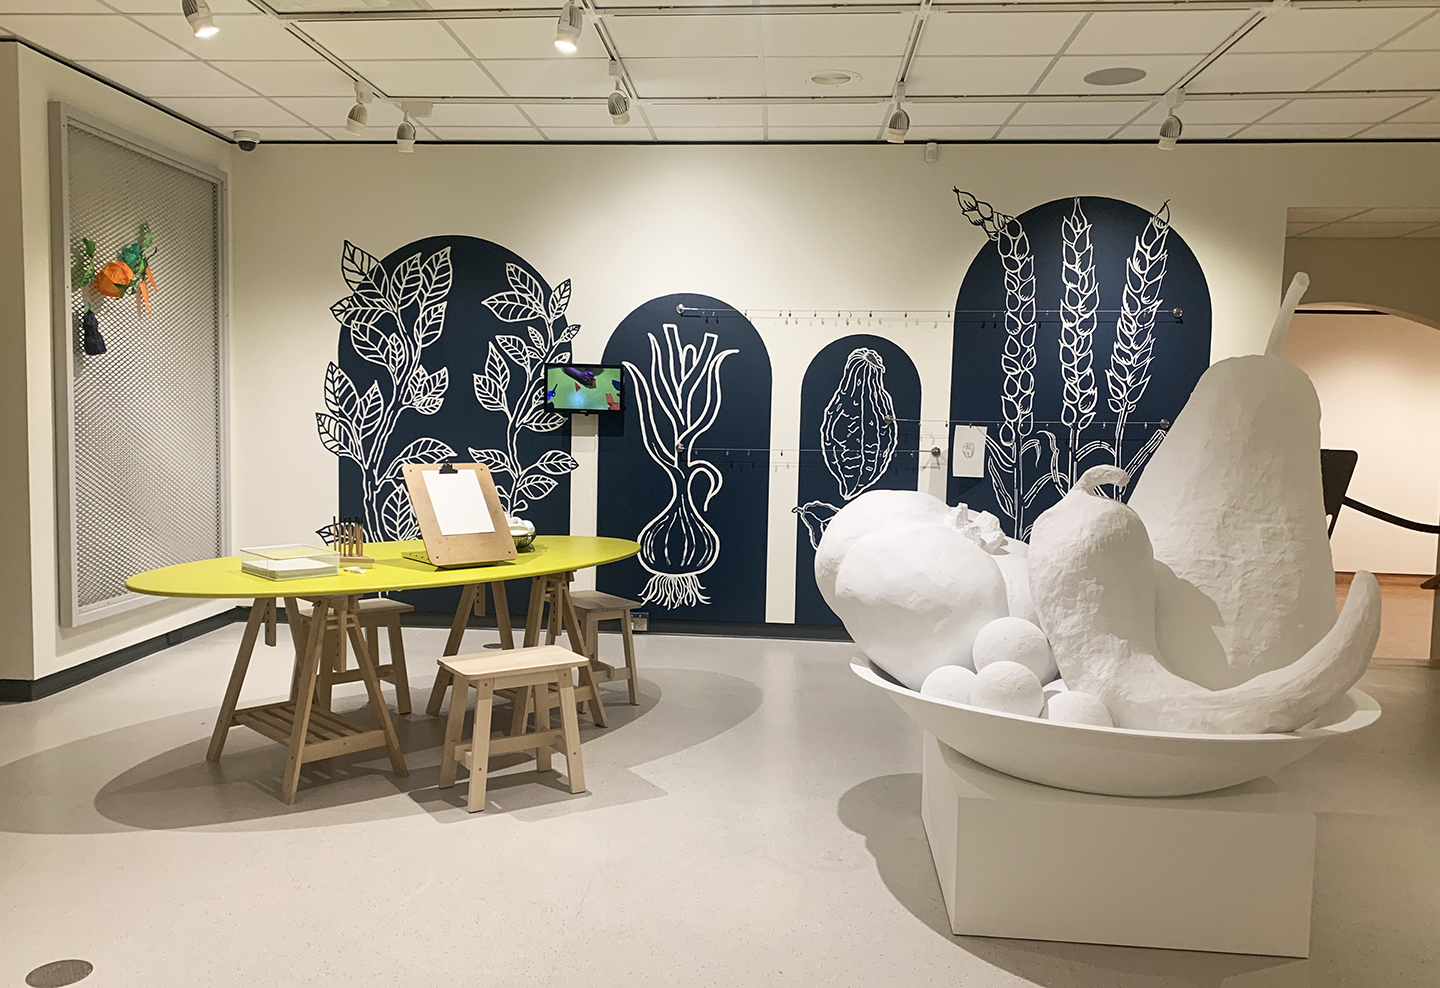 Art Park, the Museum's lower level interactive gallery is newly re-landscaped with hand-painted images of botanicals on the walls in blue and white and an oversized still life sculpture featuring an all white tomato, pear, pepper, and grapes surrounded by tables and chairs with drawing materials. 